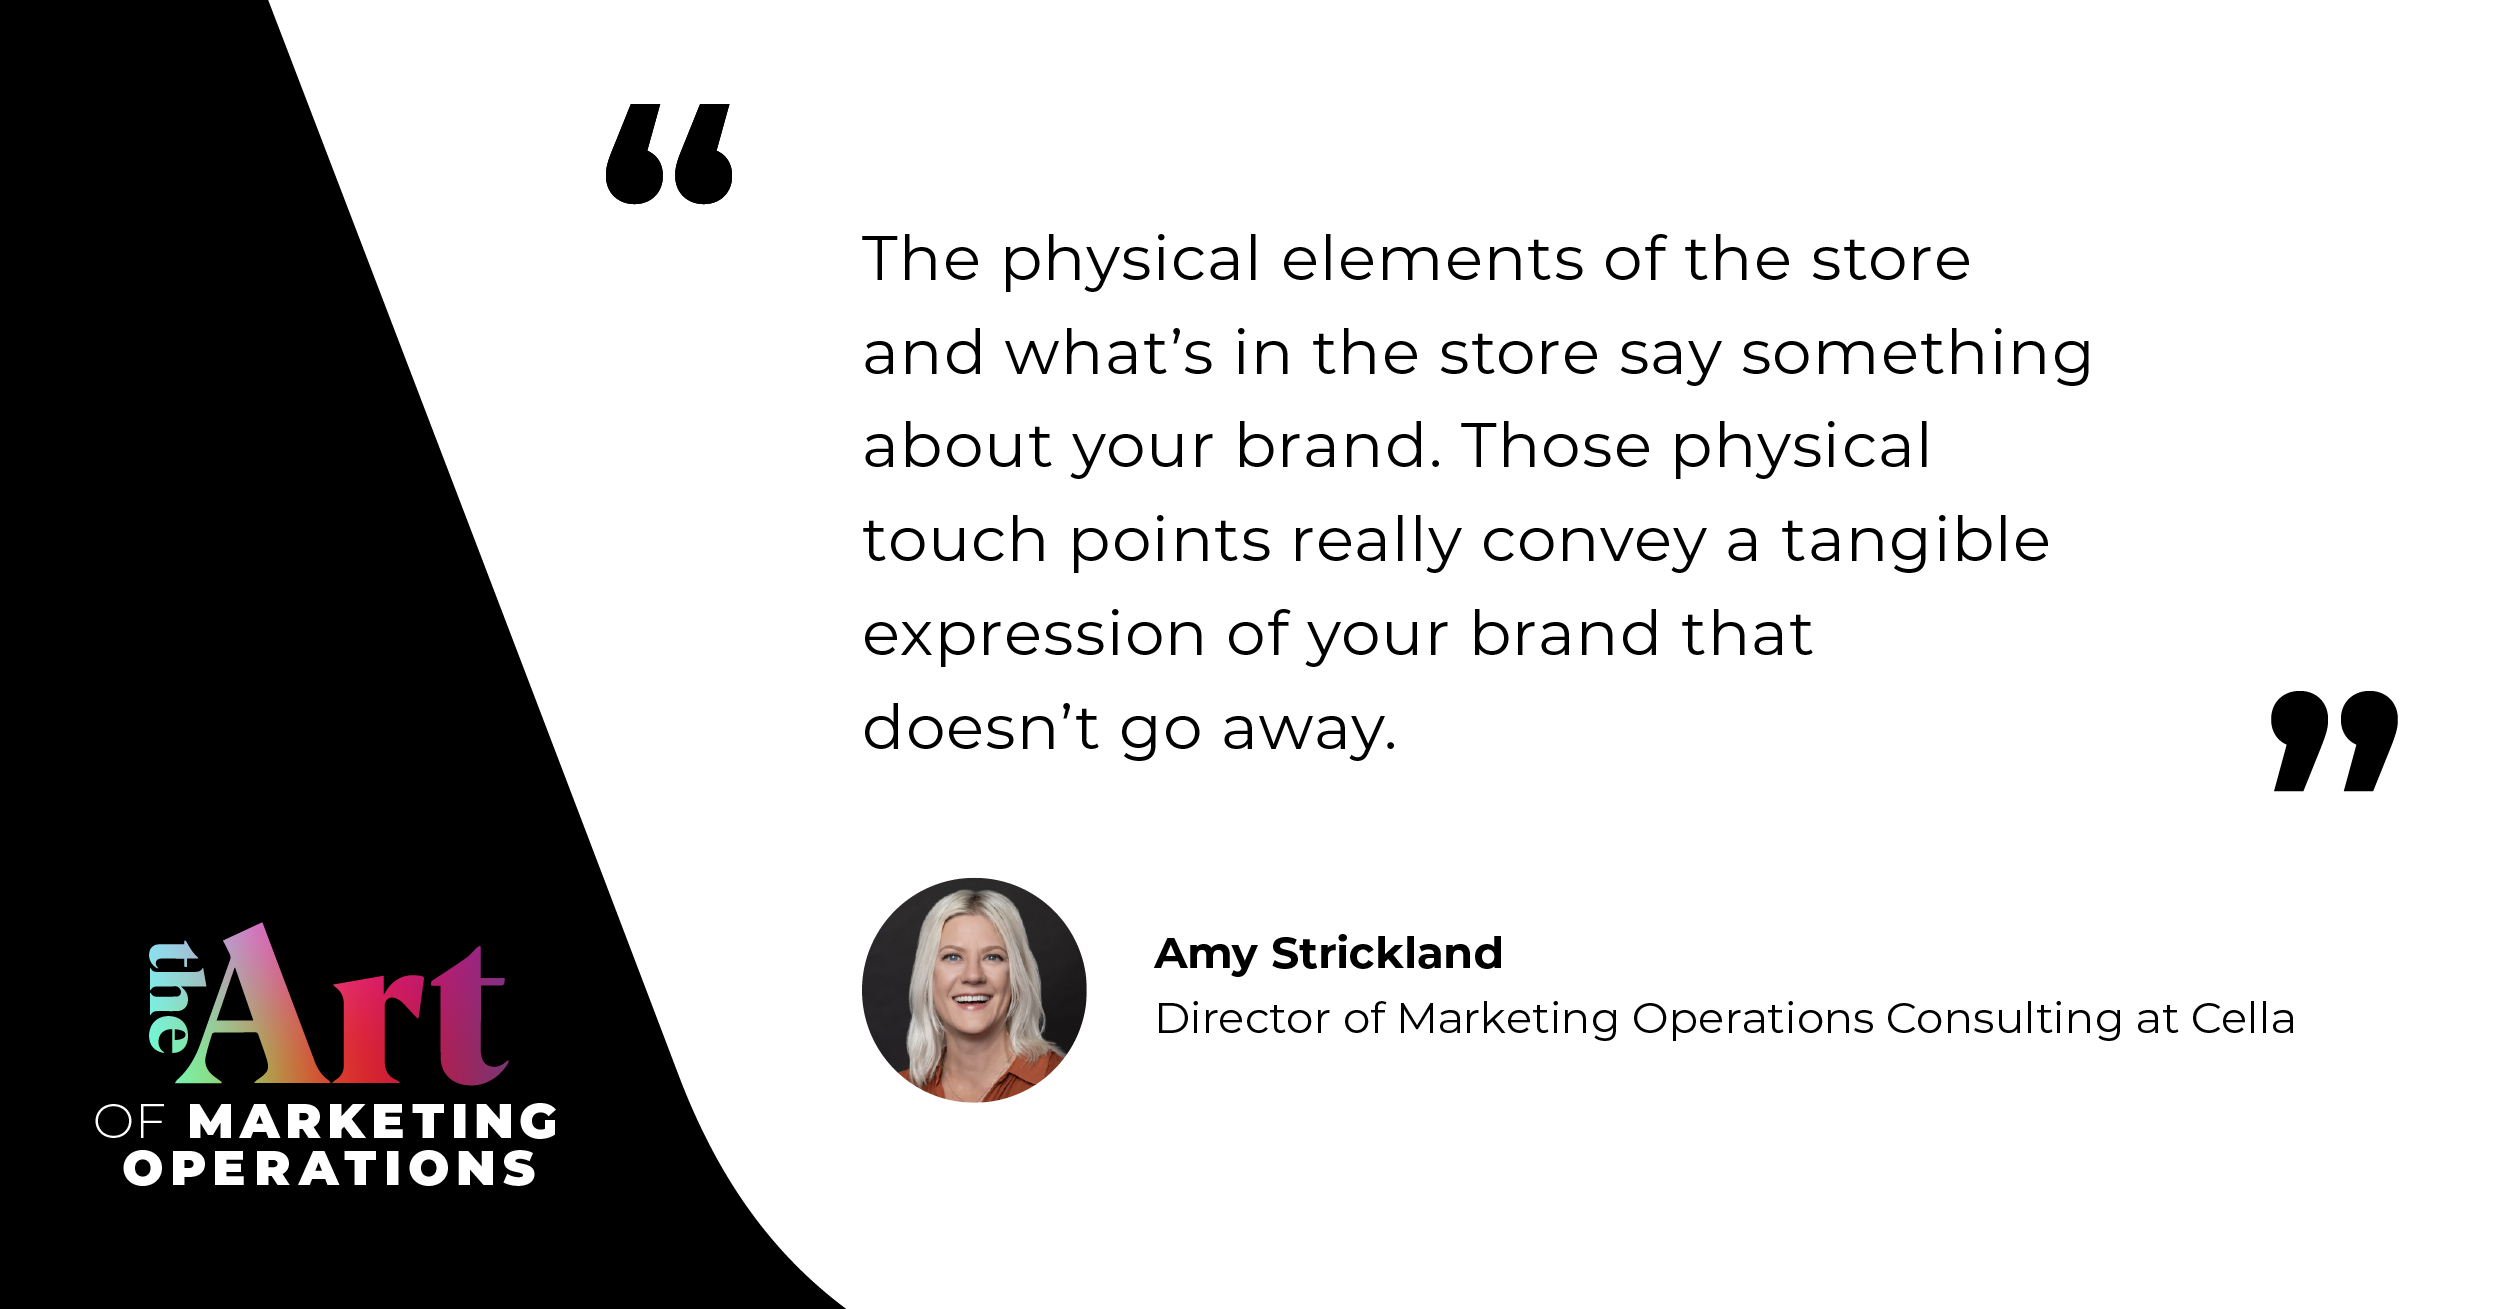 “The physical elements of the store and what's in the store say something about your brand. Those physical touch points really convey a tangible expression of your brand that doesn't go away. ”  — Amy Strickland